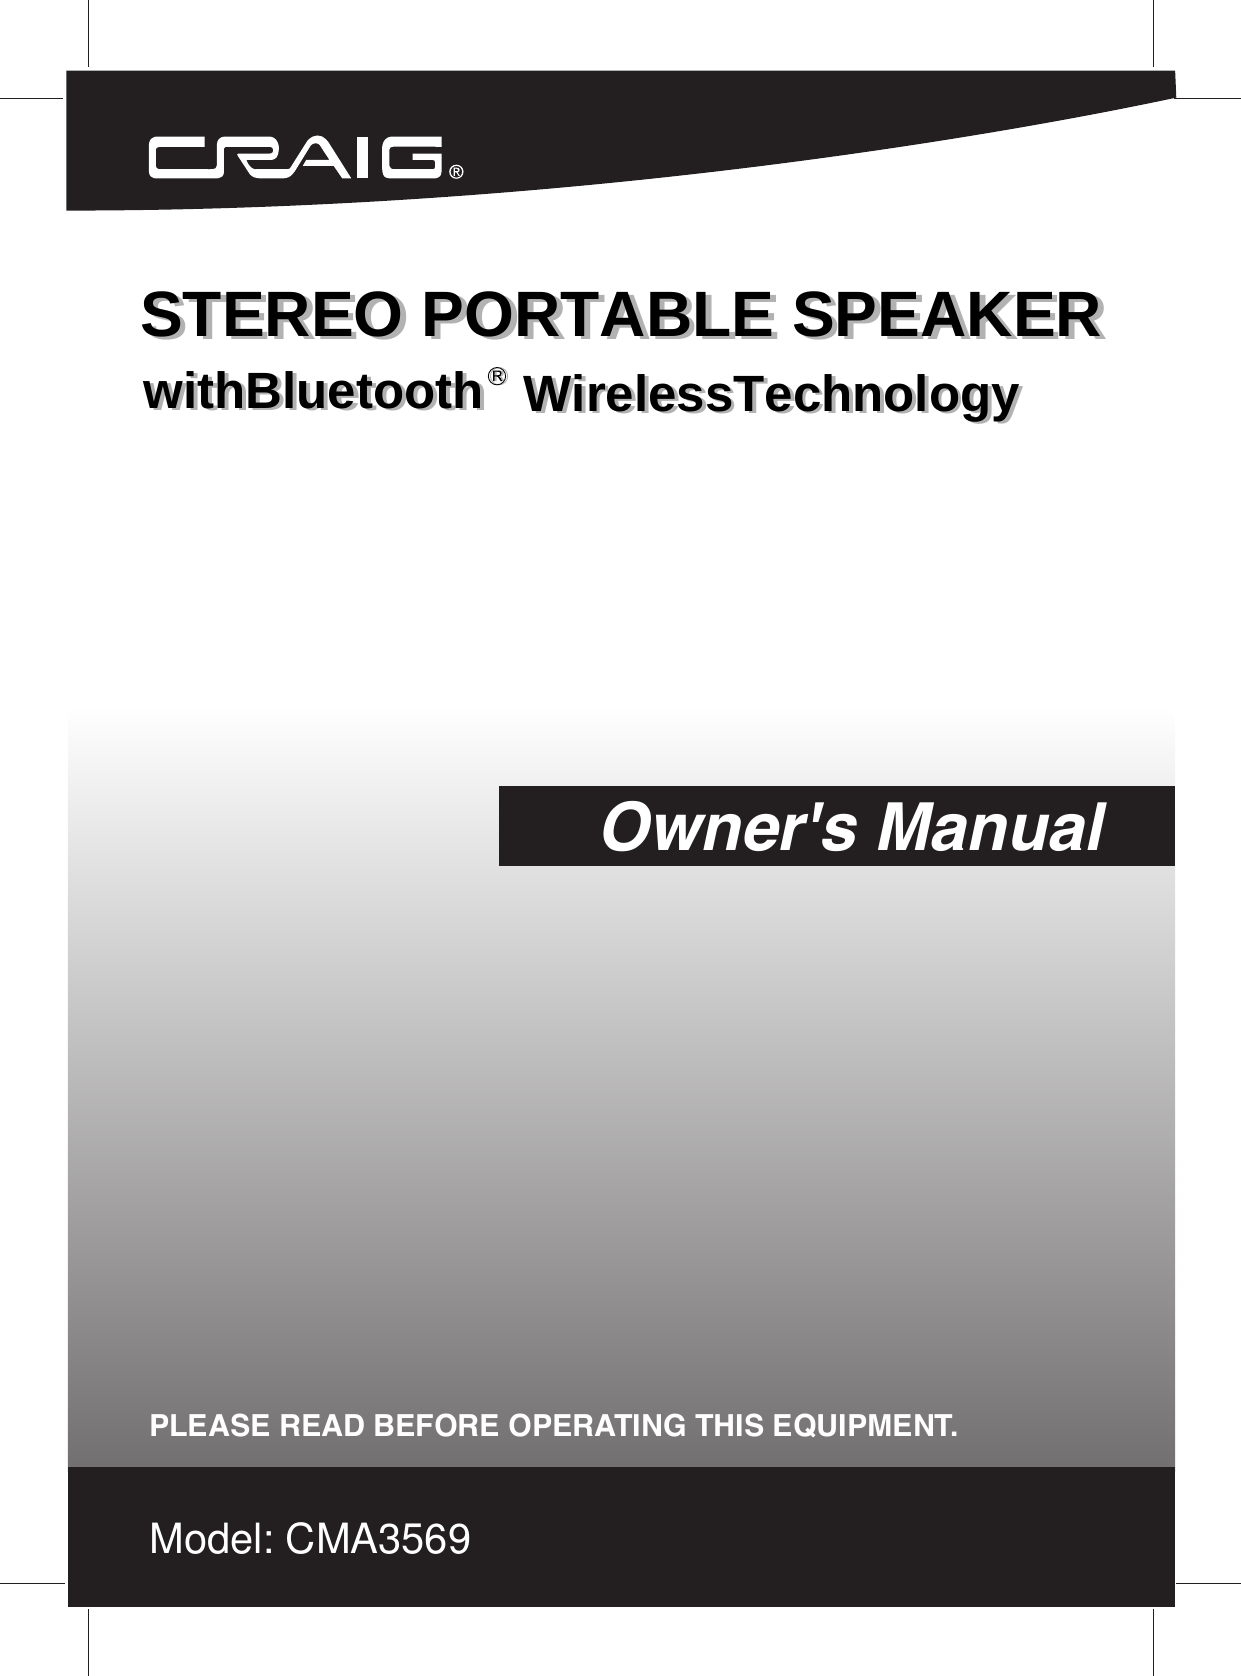 P SSTEREO ORTABLE  PEAK ER with Bluetooth  Wireless TechnologyOwner&apos;s ManualPLEASE READ BEFORE OPERATING THIS EQUIPMENT.Model: CMA3569with Bluetooth  Wireless TechnologySTEREO  PORTABLE PEAK ER S